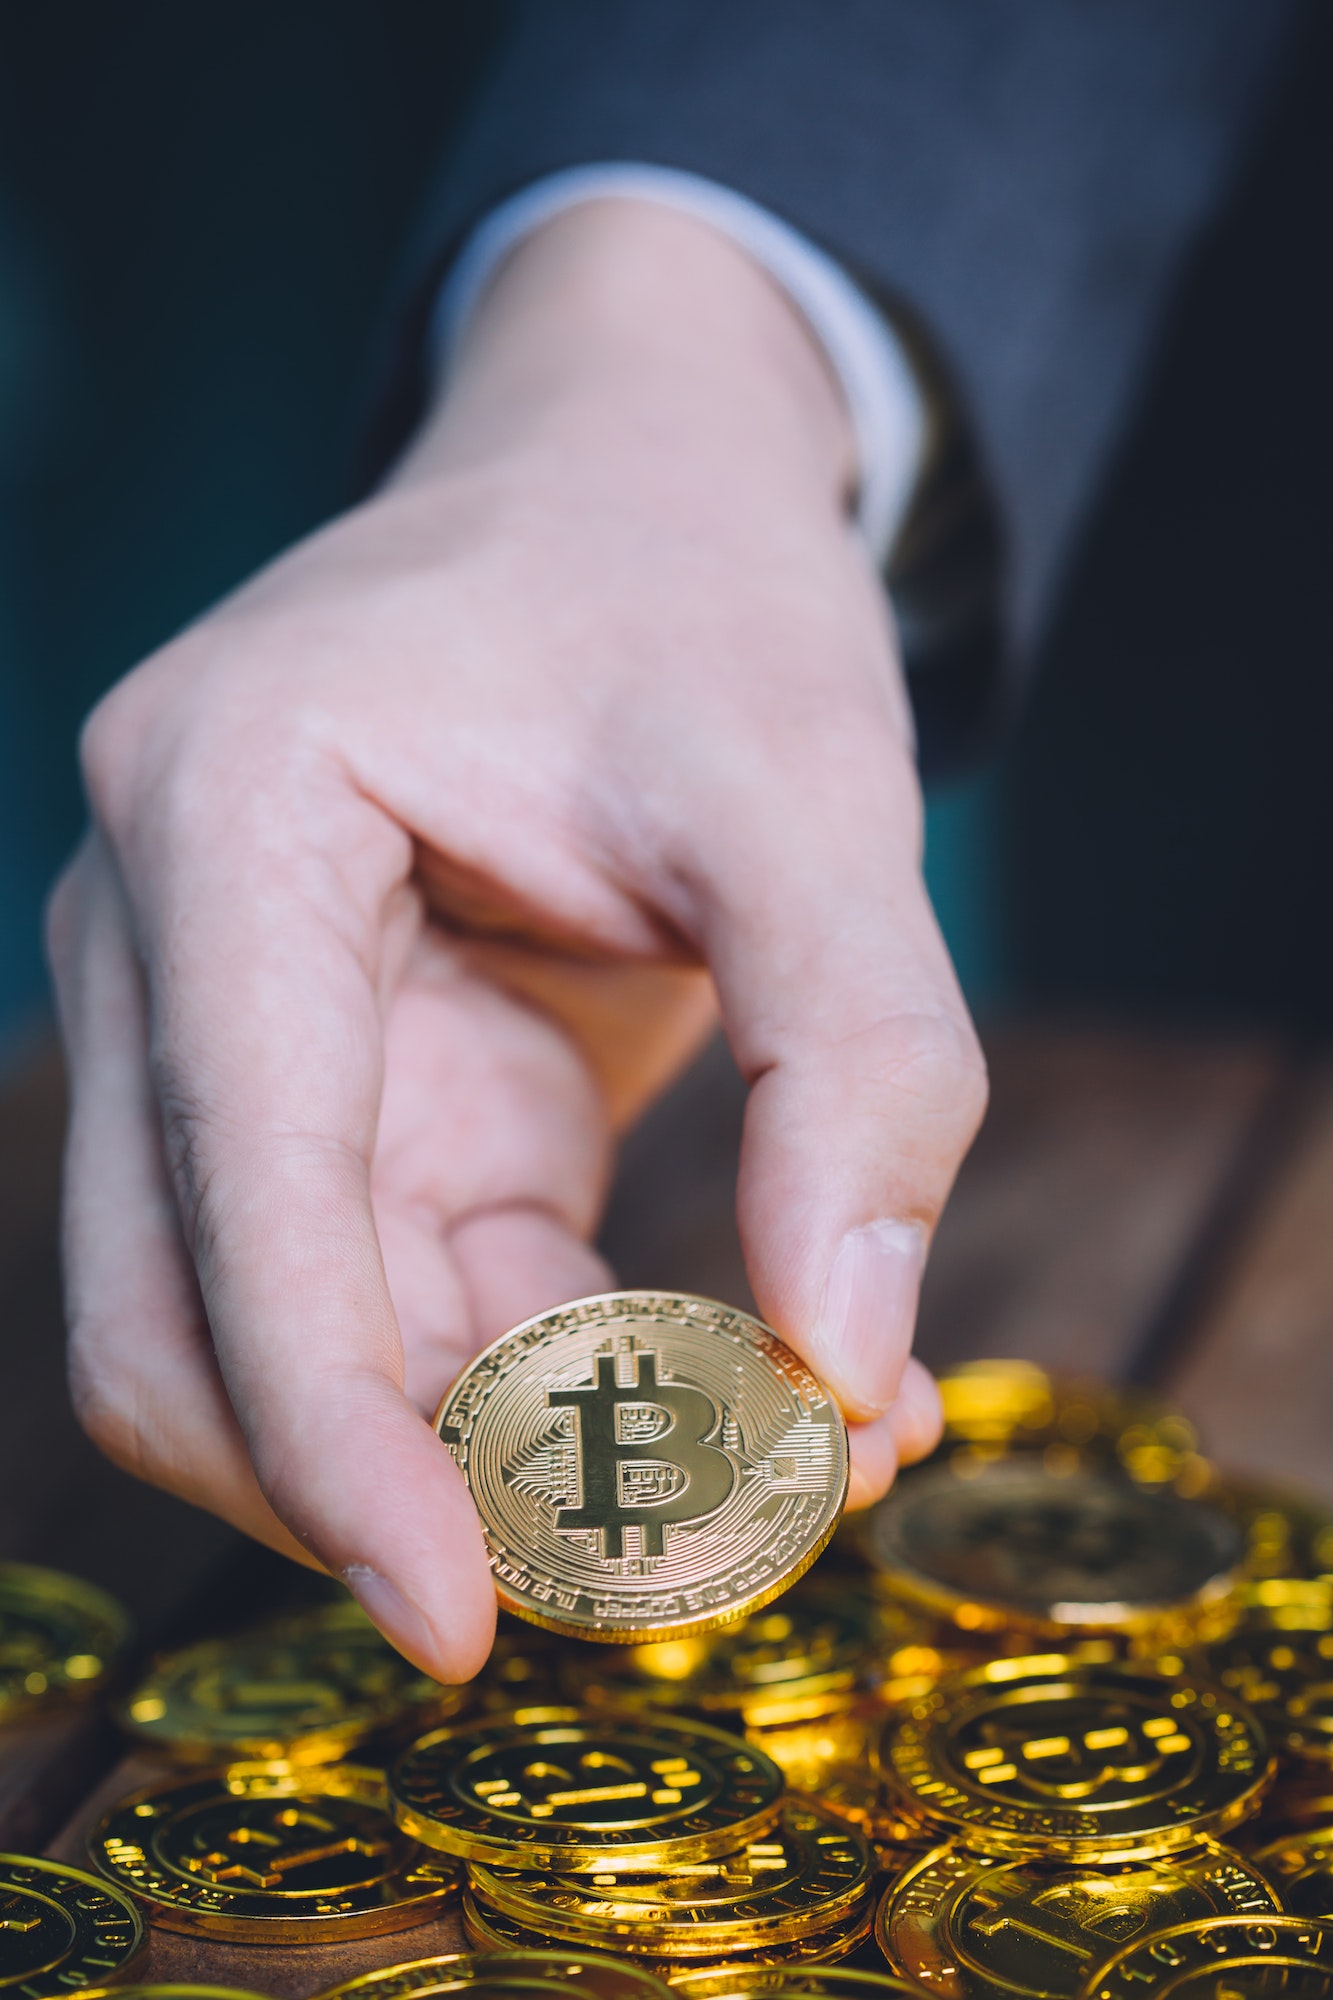 businessman counting and holding bitcoin sign of coins - vertical image